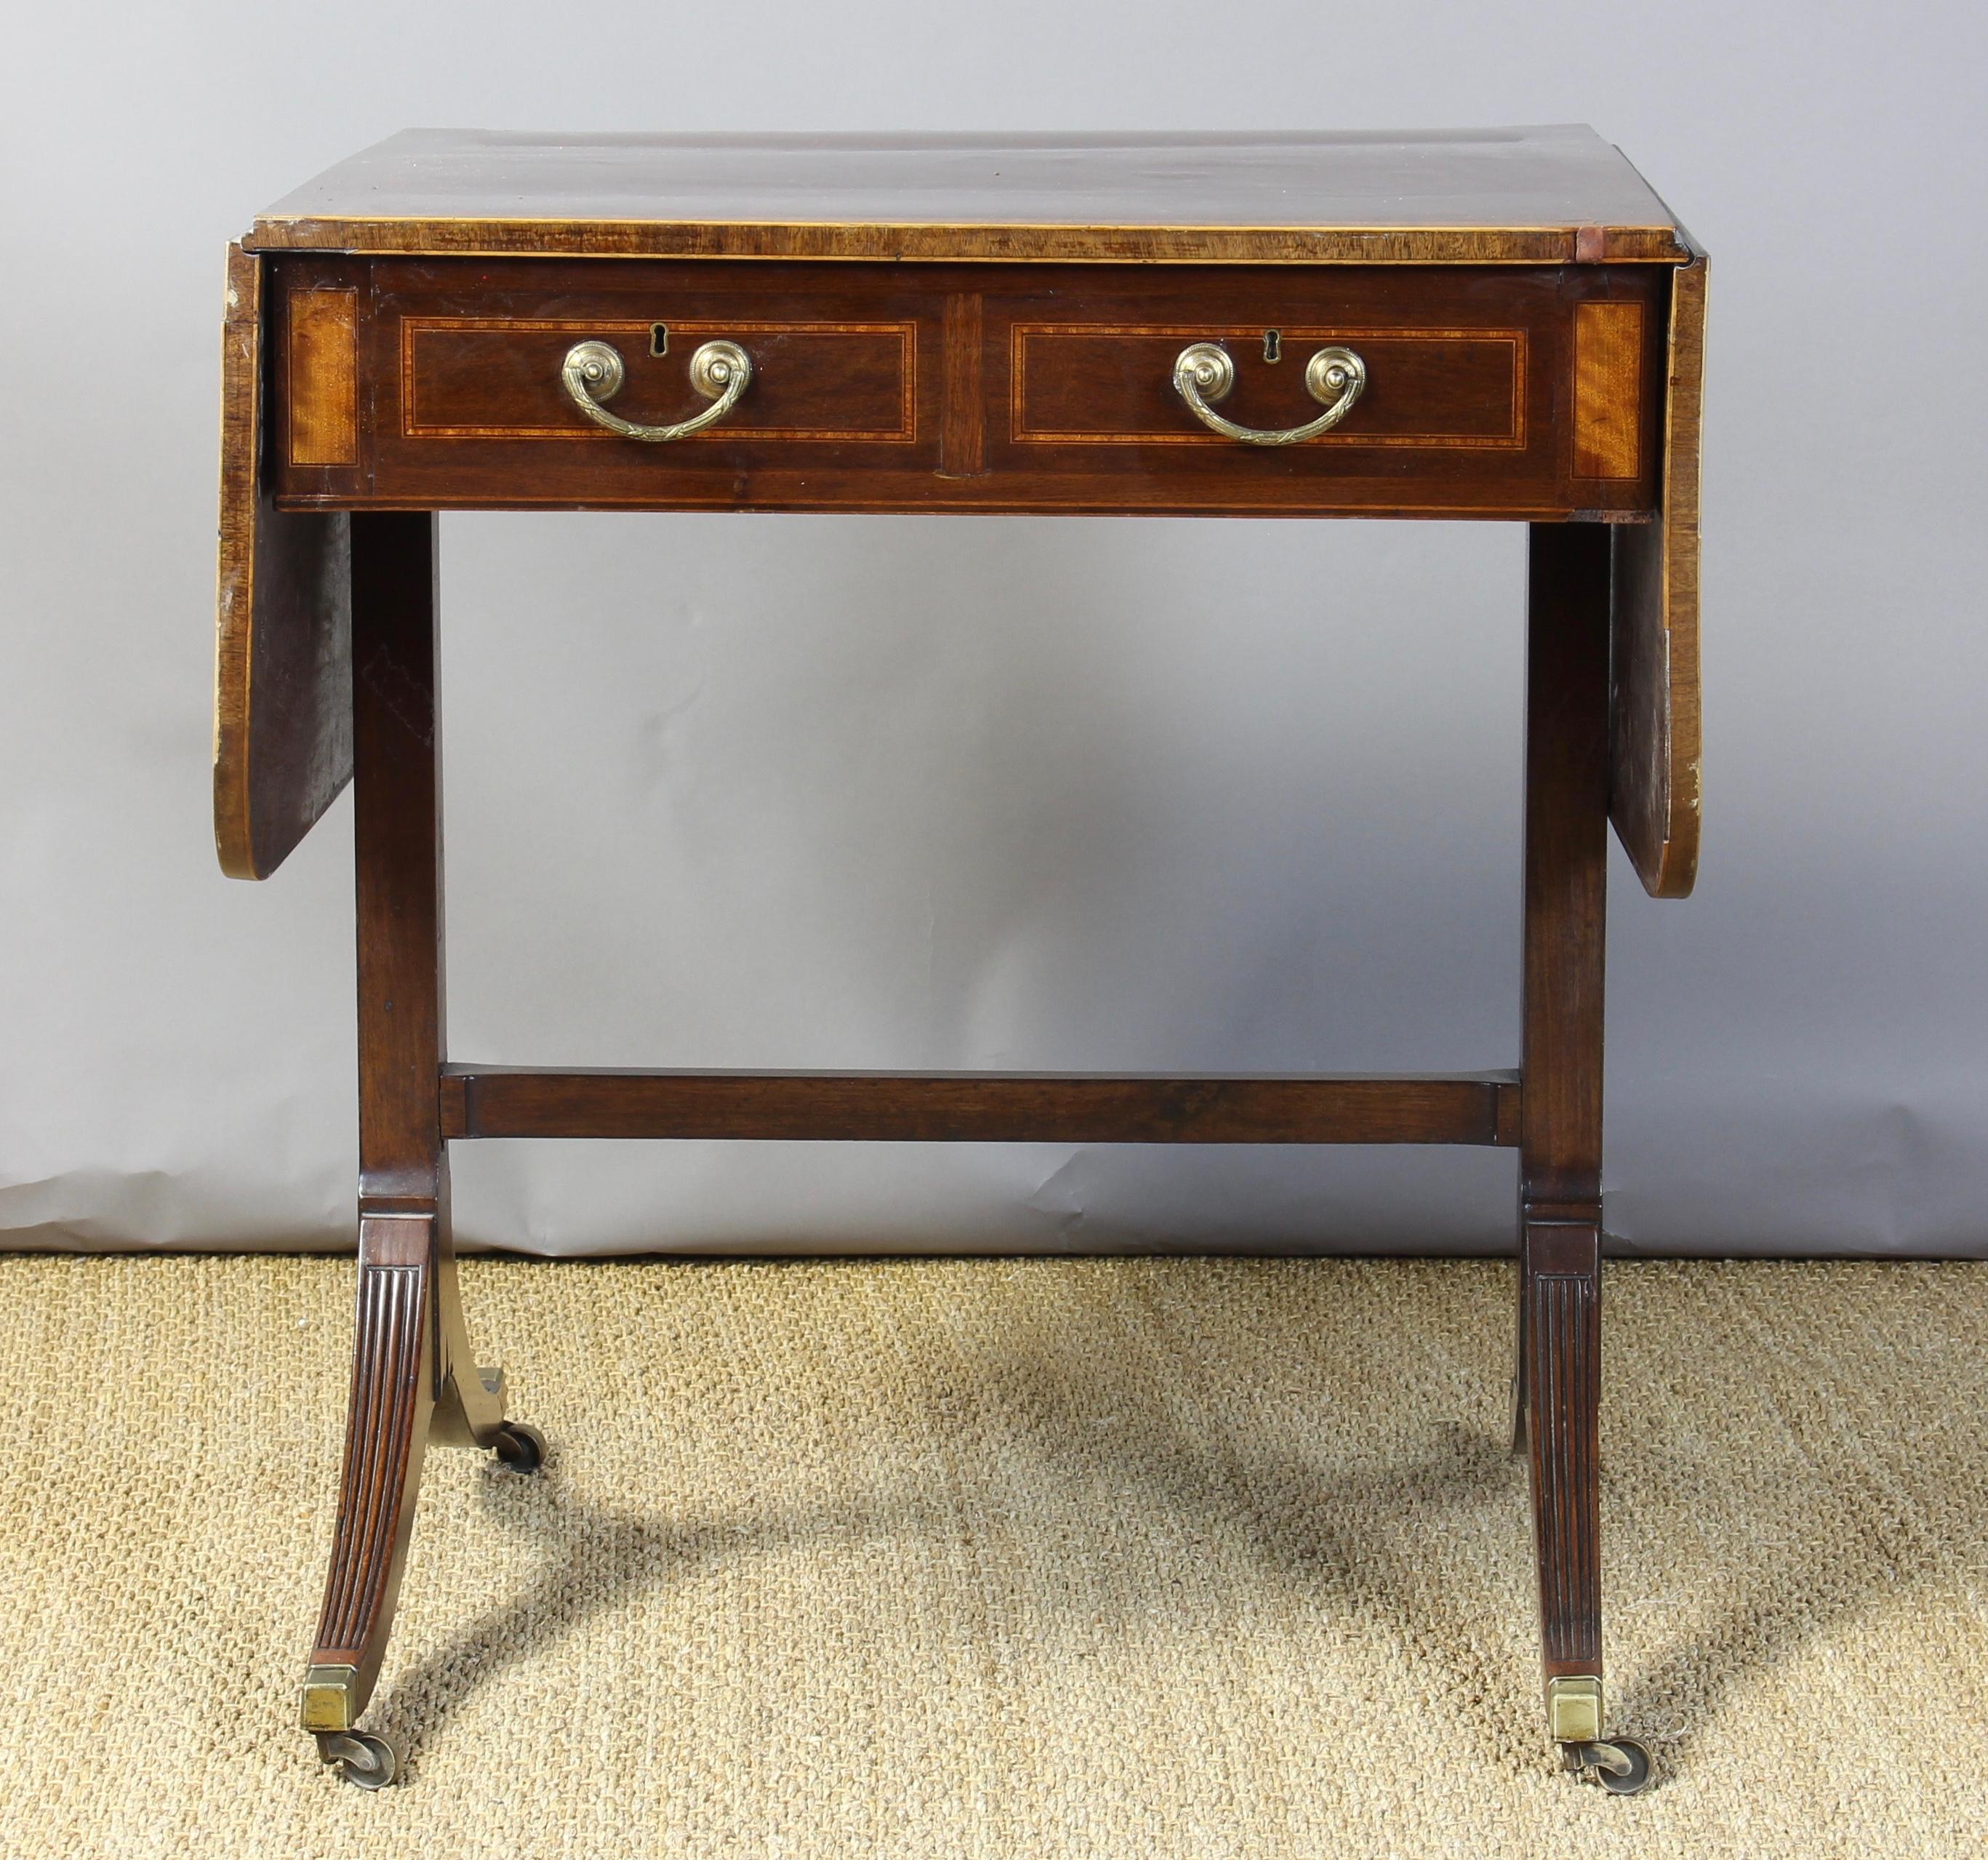 An early 19th century English mahogany drop-leaf sofa table with satinwood inlay and original brass hardware on two working drawers and two dummy drawers resting on reeded saber legs terminating in brass casters.